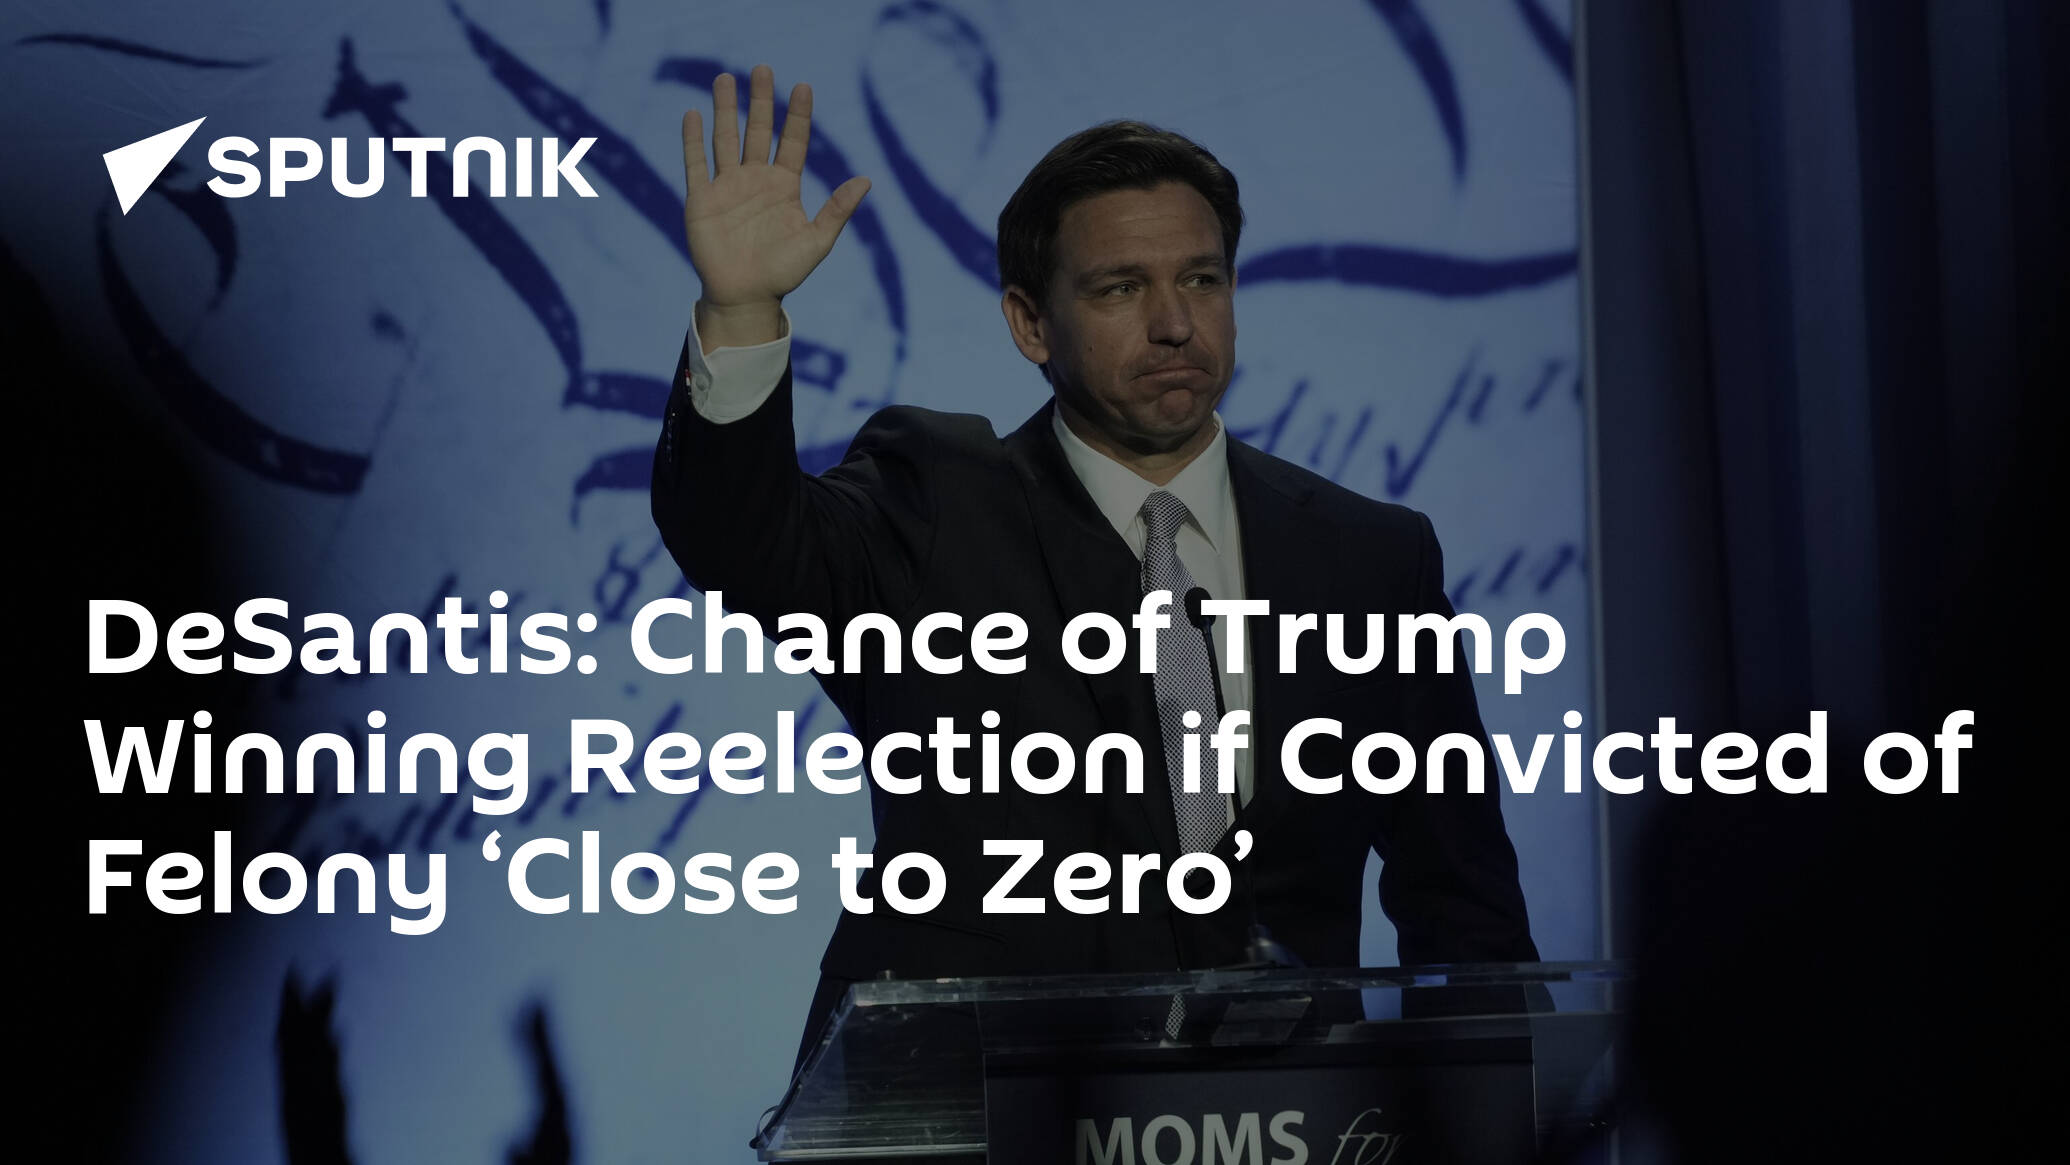 DeSantis Says Chance of Trump Winning Reelection if Convicted of Felony ‘Close to Zero’